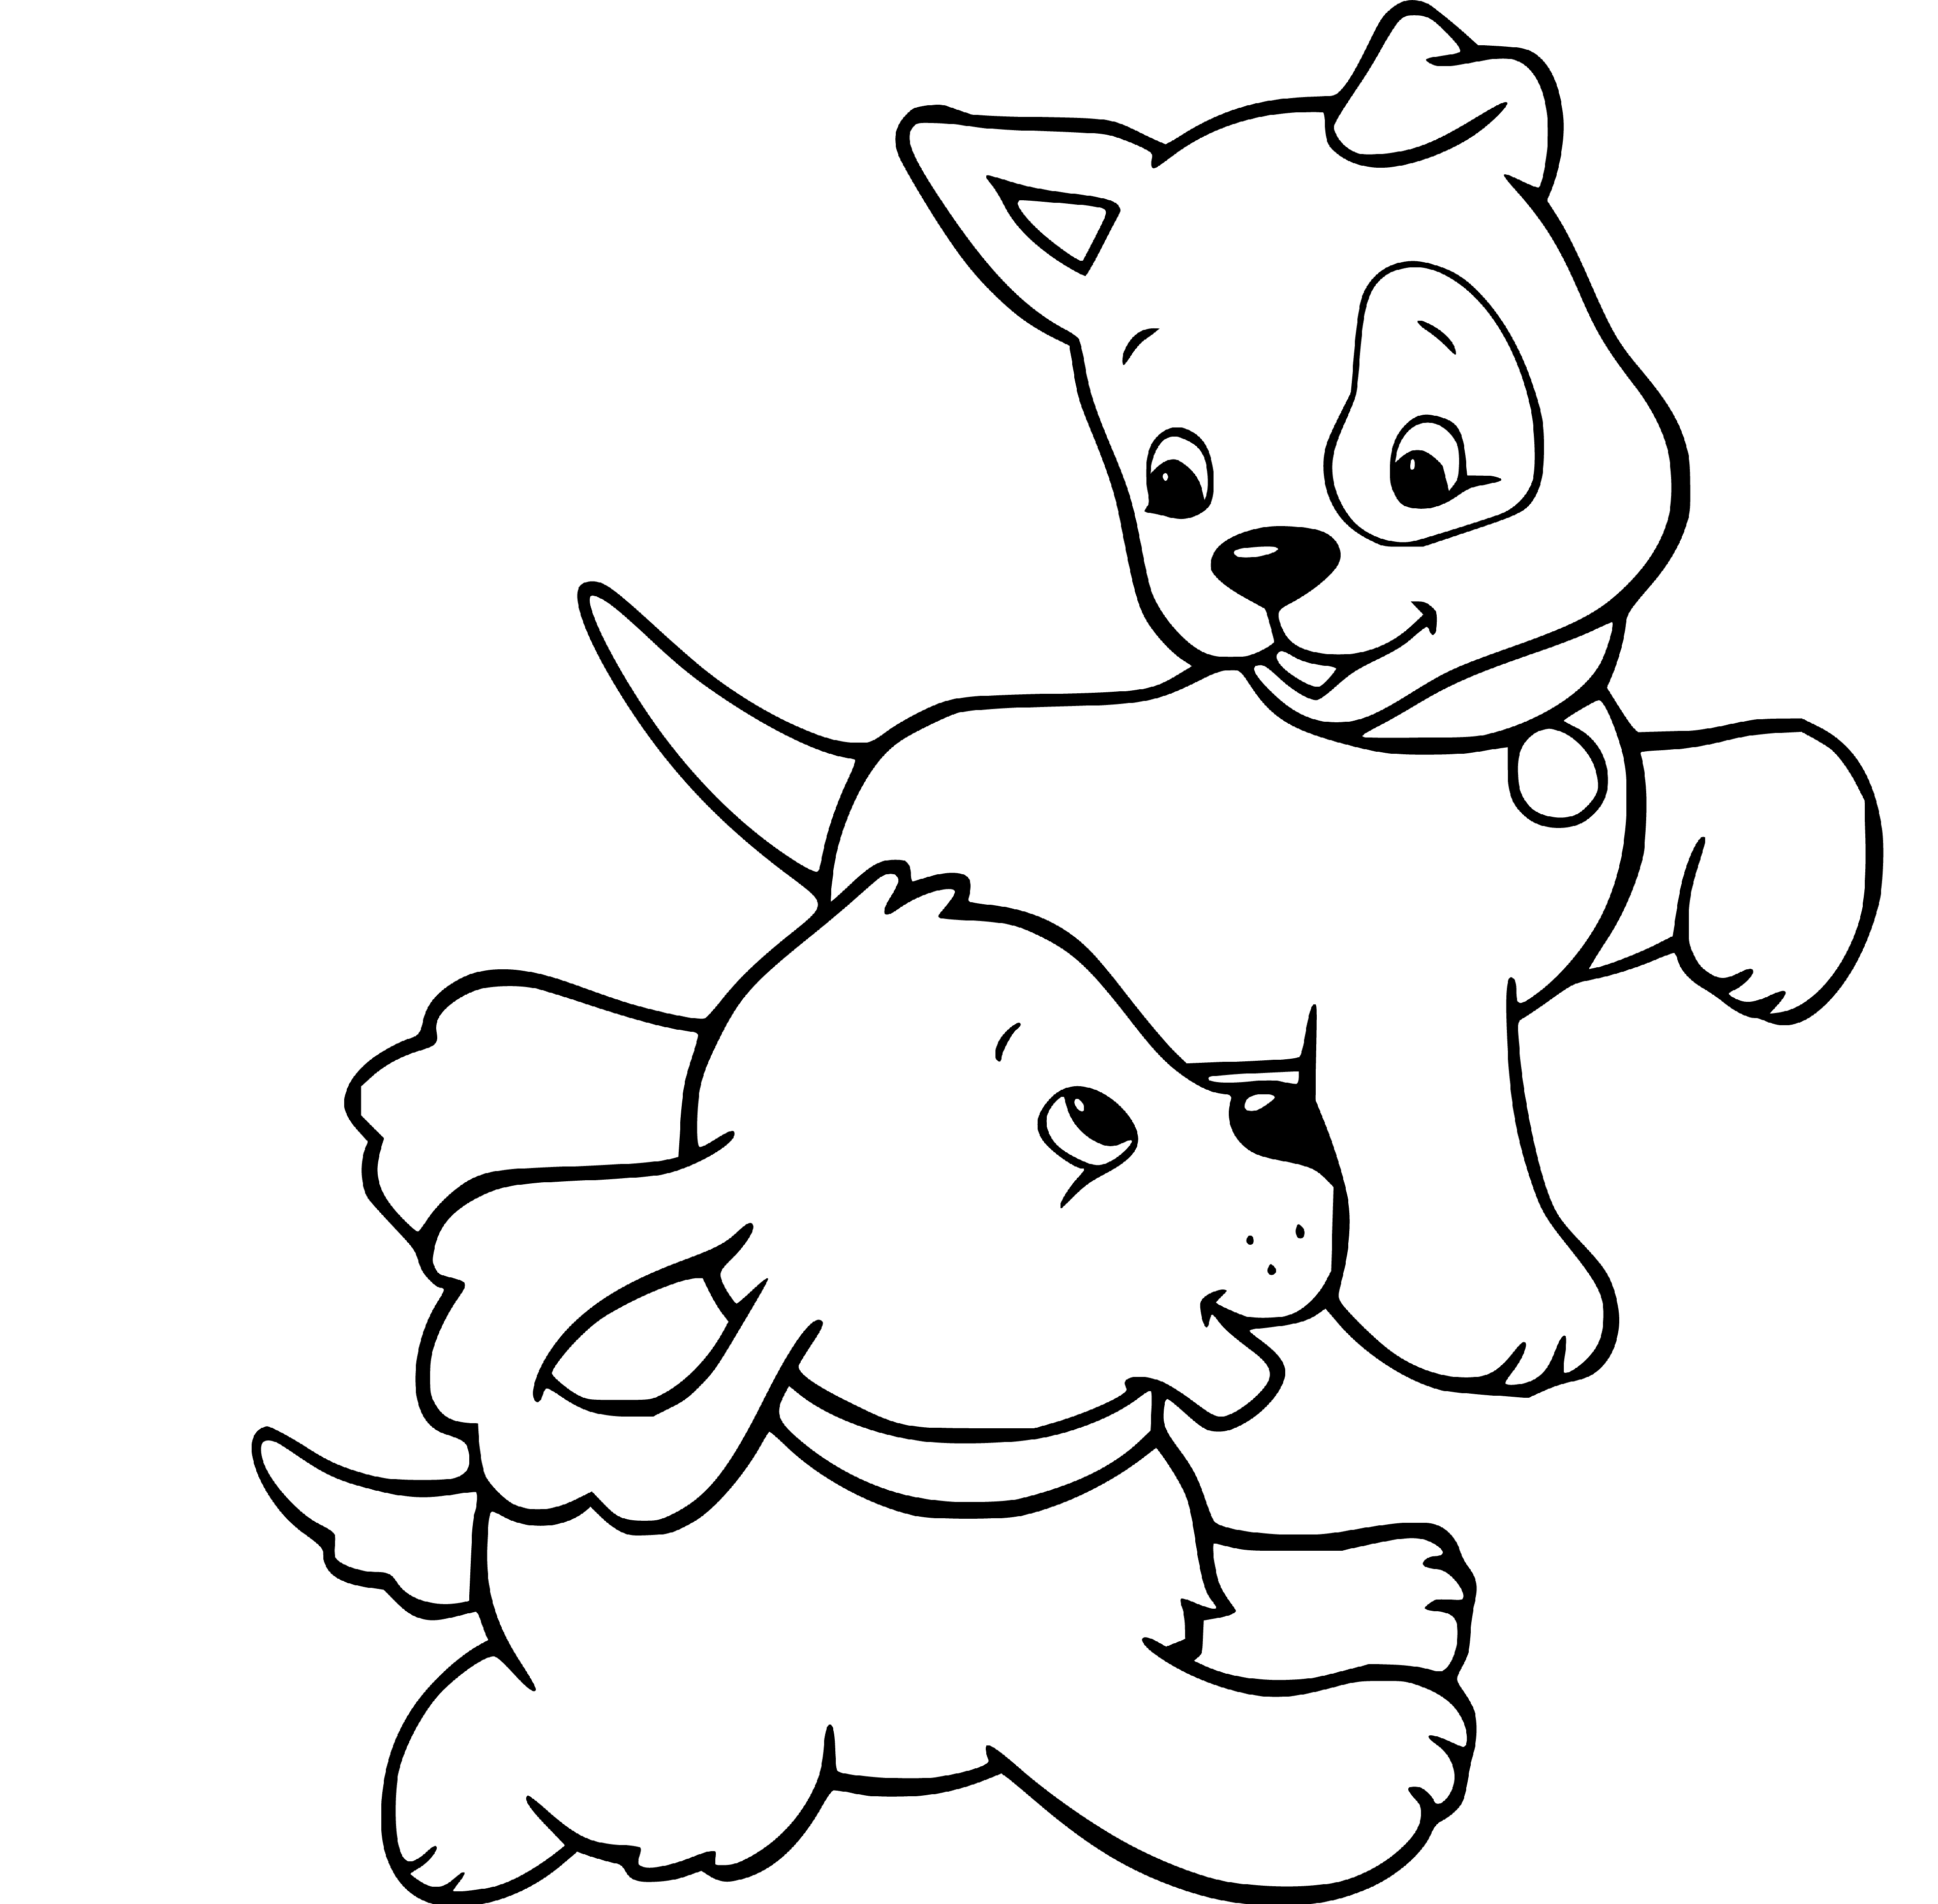 Simple Puppies Coloring Pages for Children - SheetalColor.com